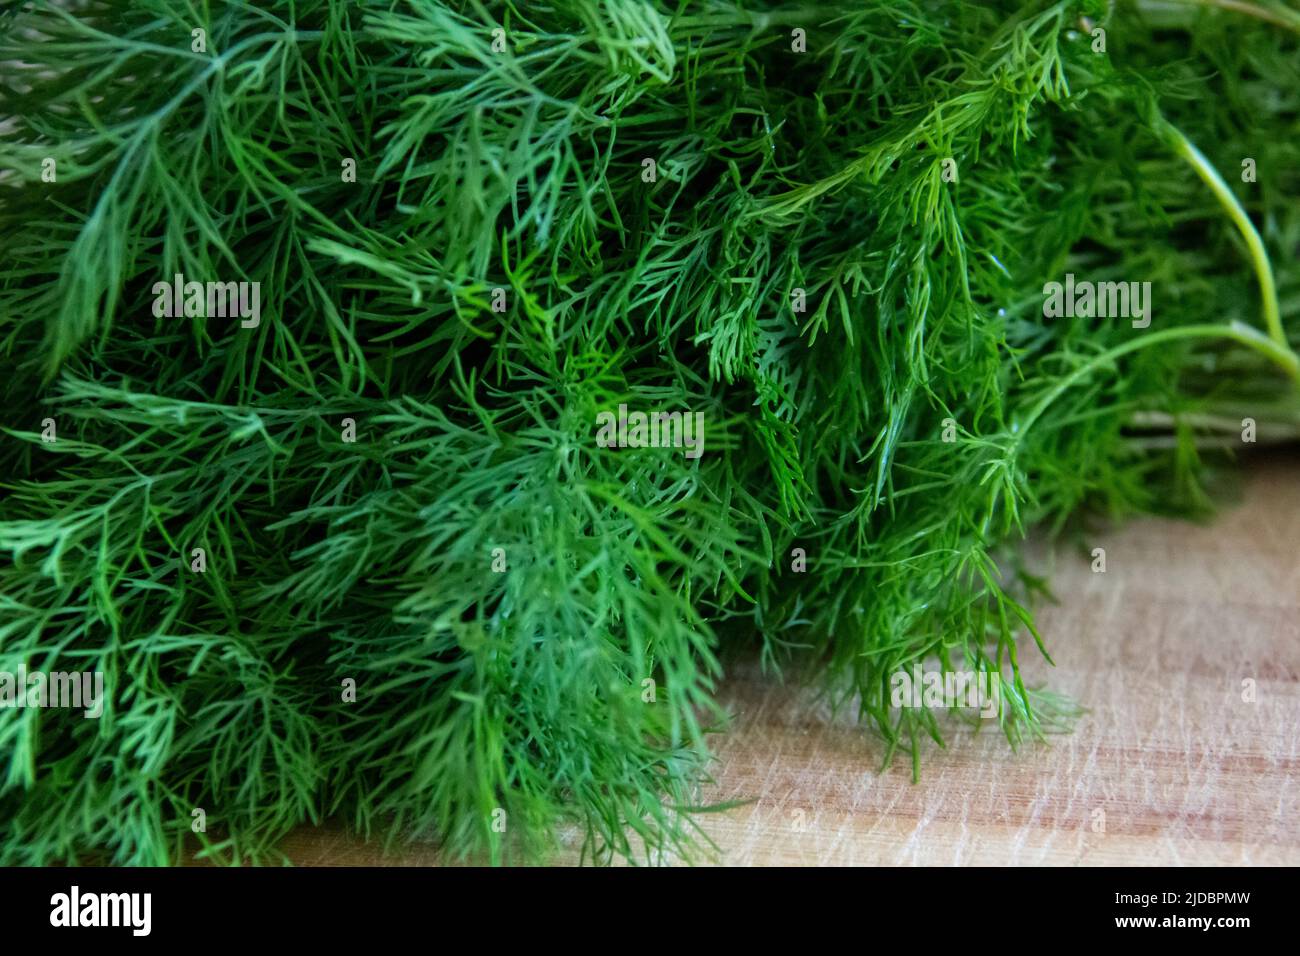 A green bunch of dill on a cutting board. Vegetarian fresh seasoning dill, lots of dill greens on a table. Stock Photo